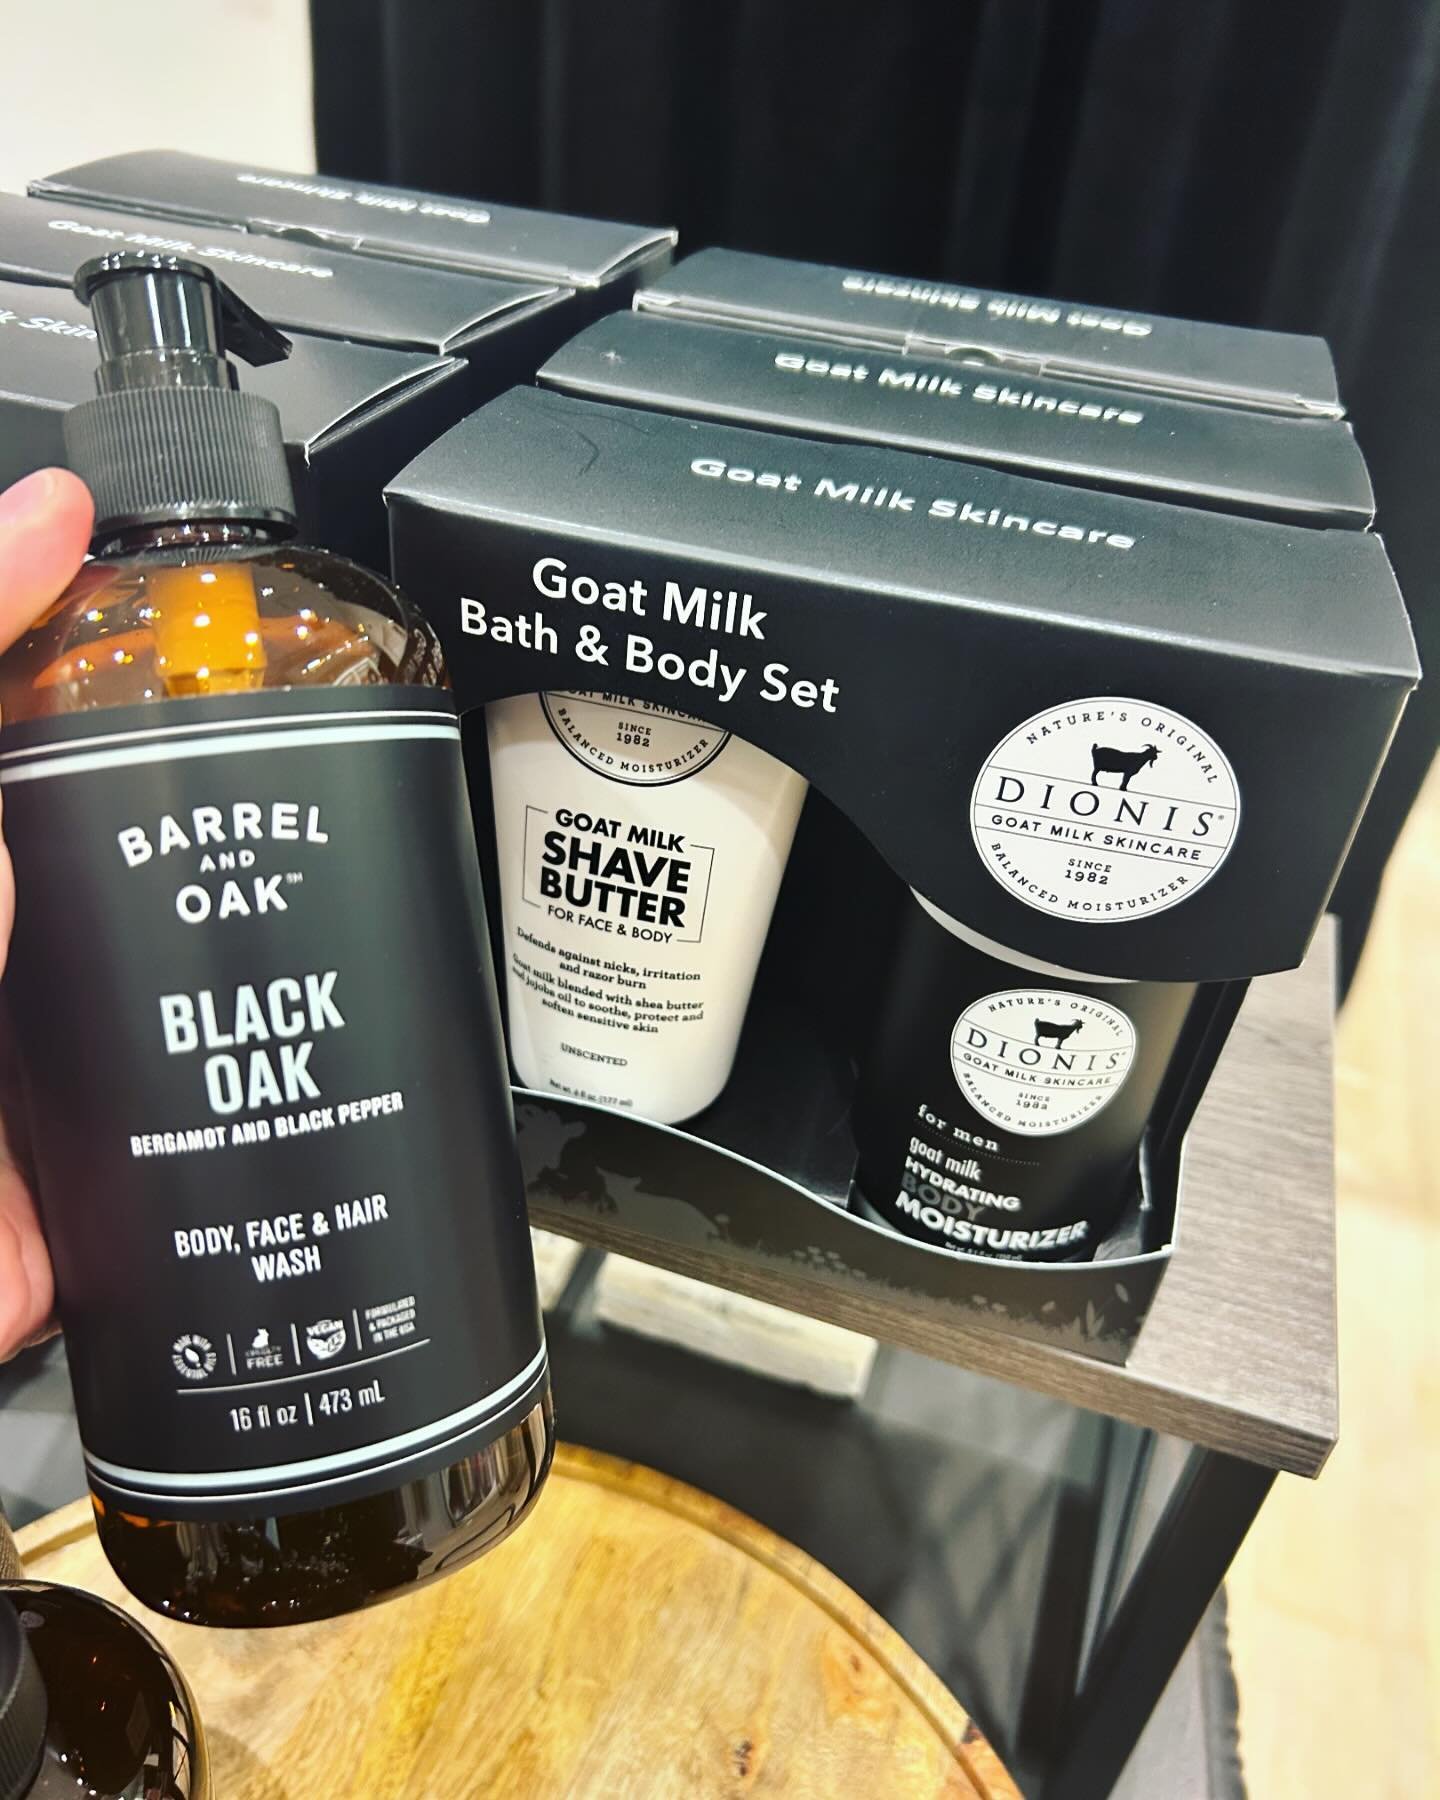 Men like pampering, too!  Stop by and check out our elevated collection of men&rsquo;s toiletry items perfect for Father&rsquo;s Day gift giving. Open til 6 @thecrossingclarendon. 

#shopsmall #shoparl #shoplocal #boutiqueshopping #clarendonva #mensg